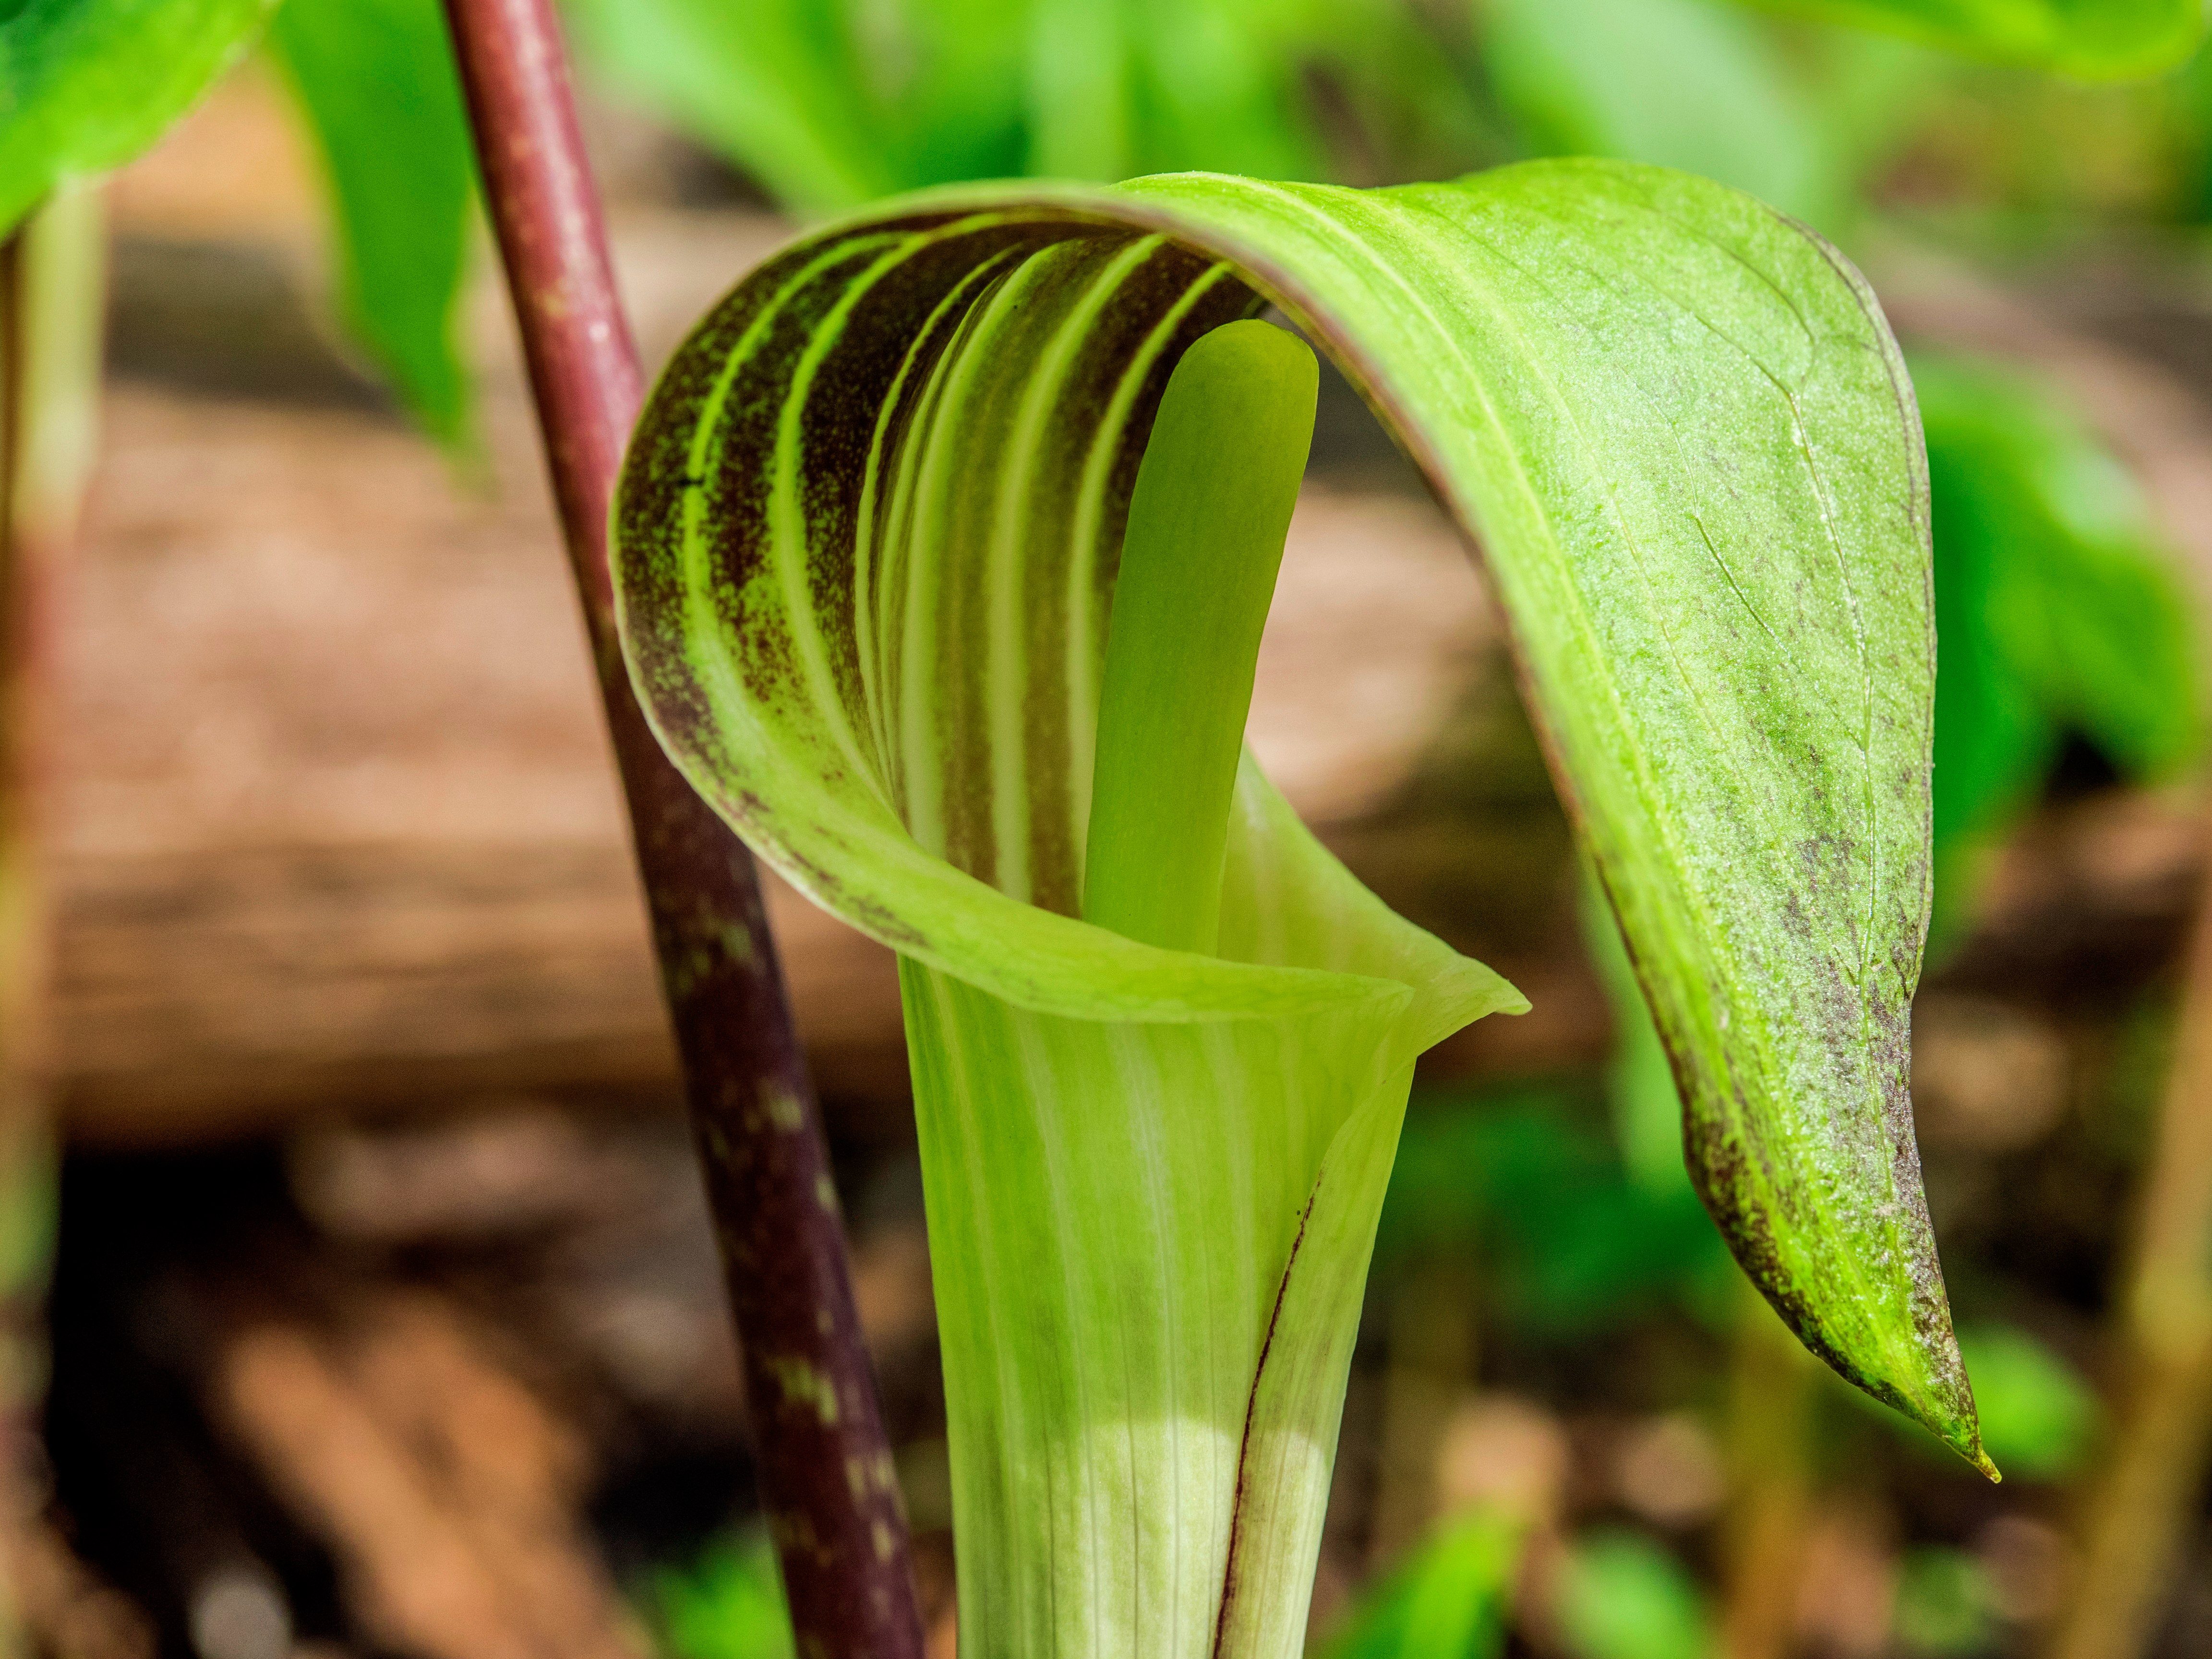 Jack-in-the-Pulpit.